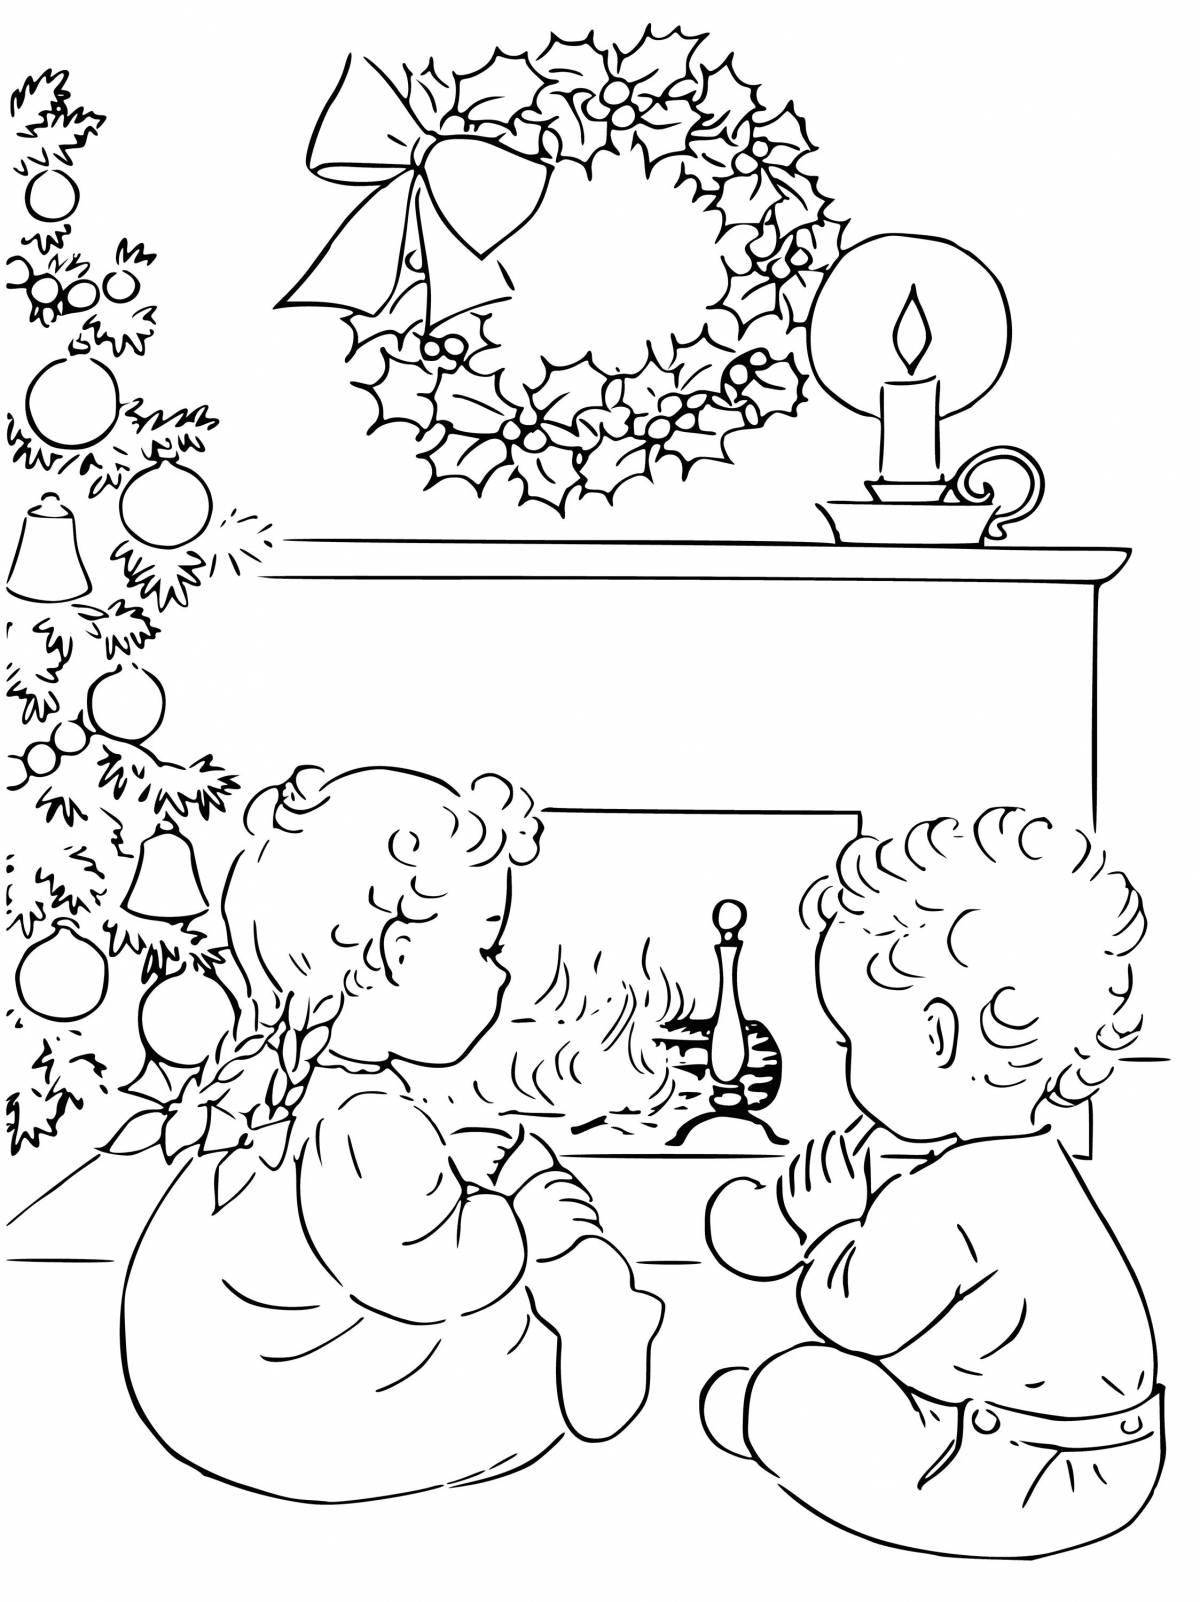 Christmas story coloring book